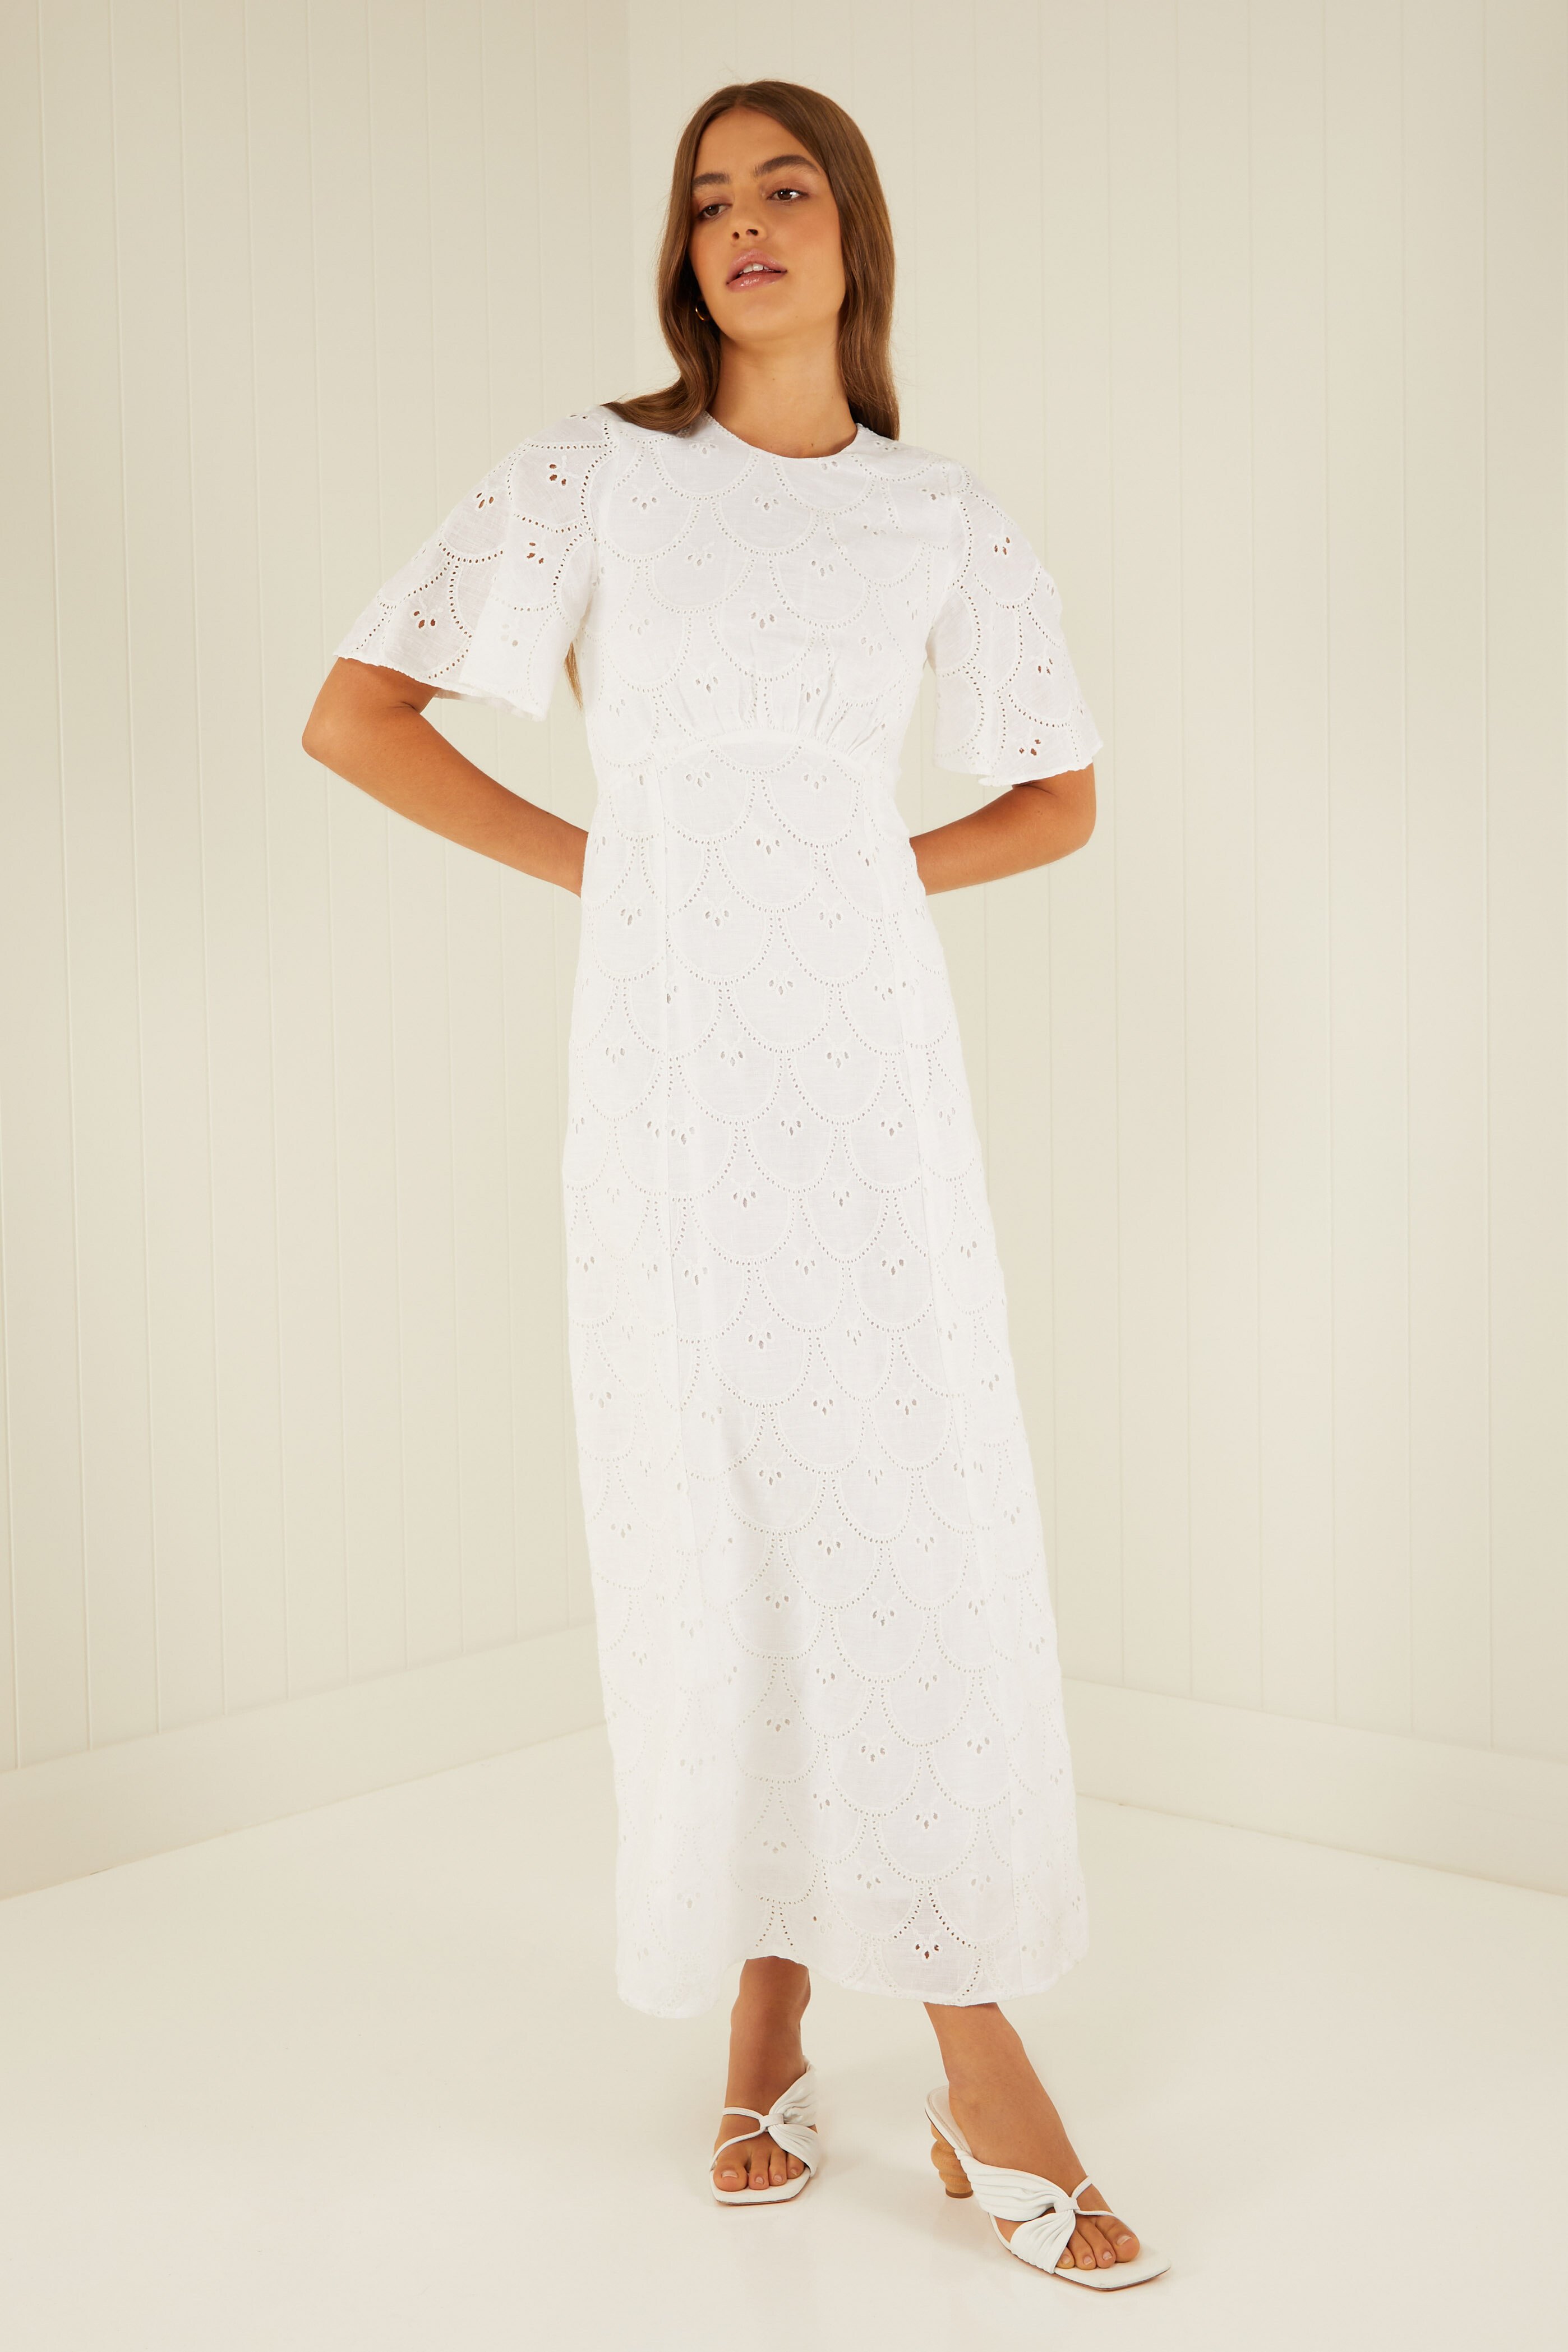 MOON AND BACK DRESS (WHITE)- PALM NOOSA SPRING 22 Boxing Day Sale